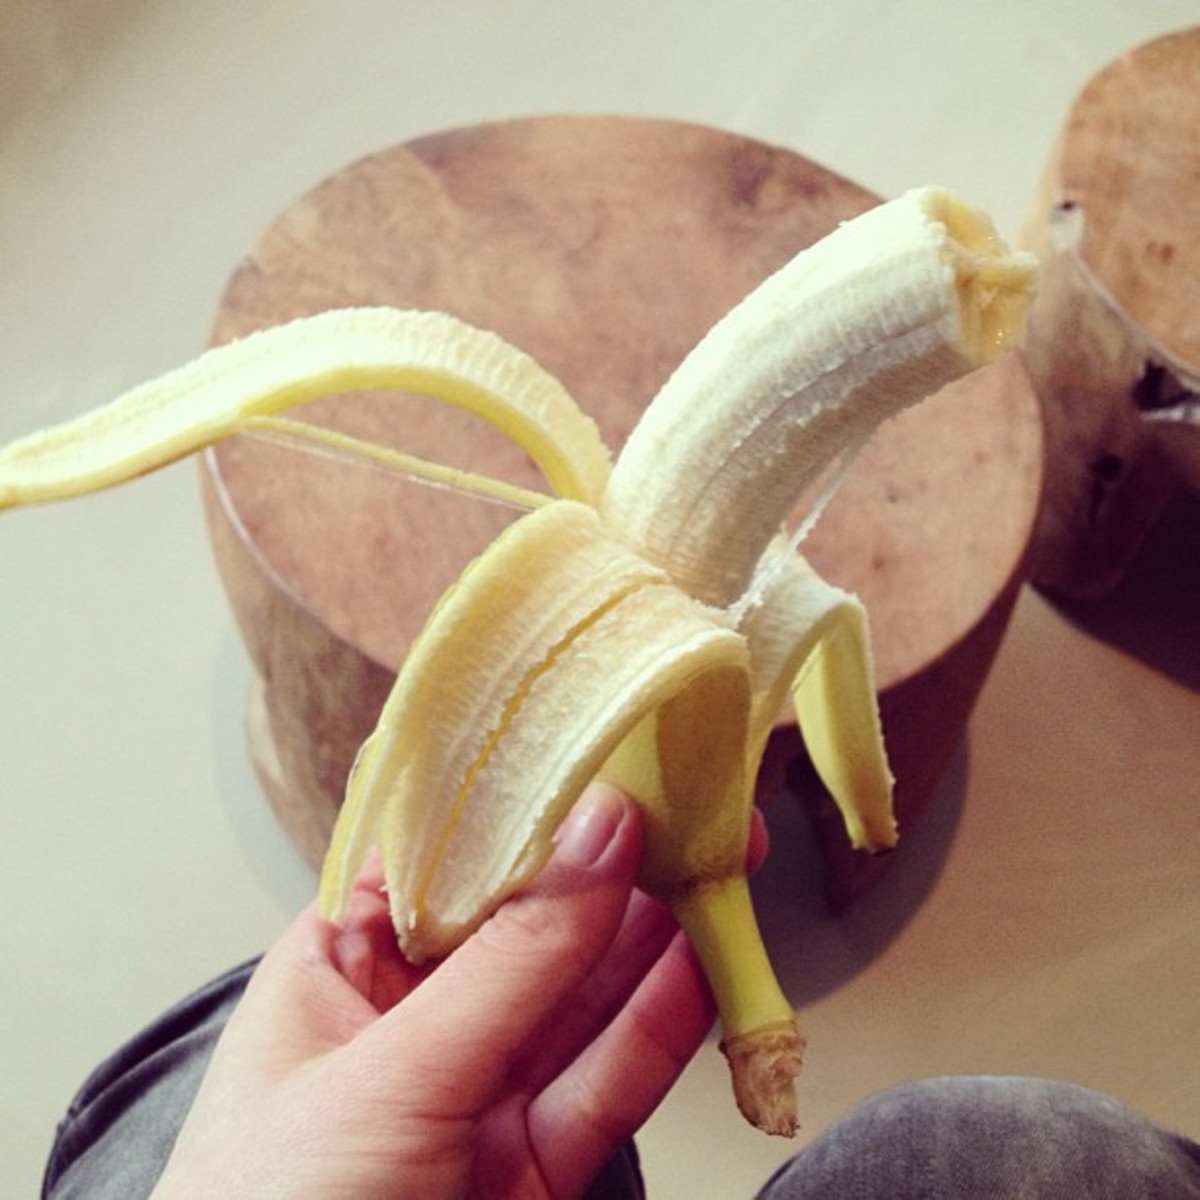 Did you know that monkeys peel bananas upside down? Or maybe they're the ones doing it right-side up!